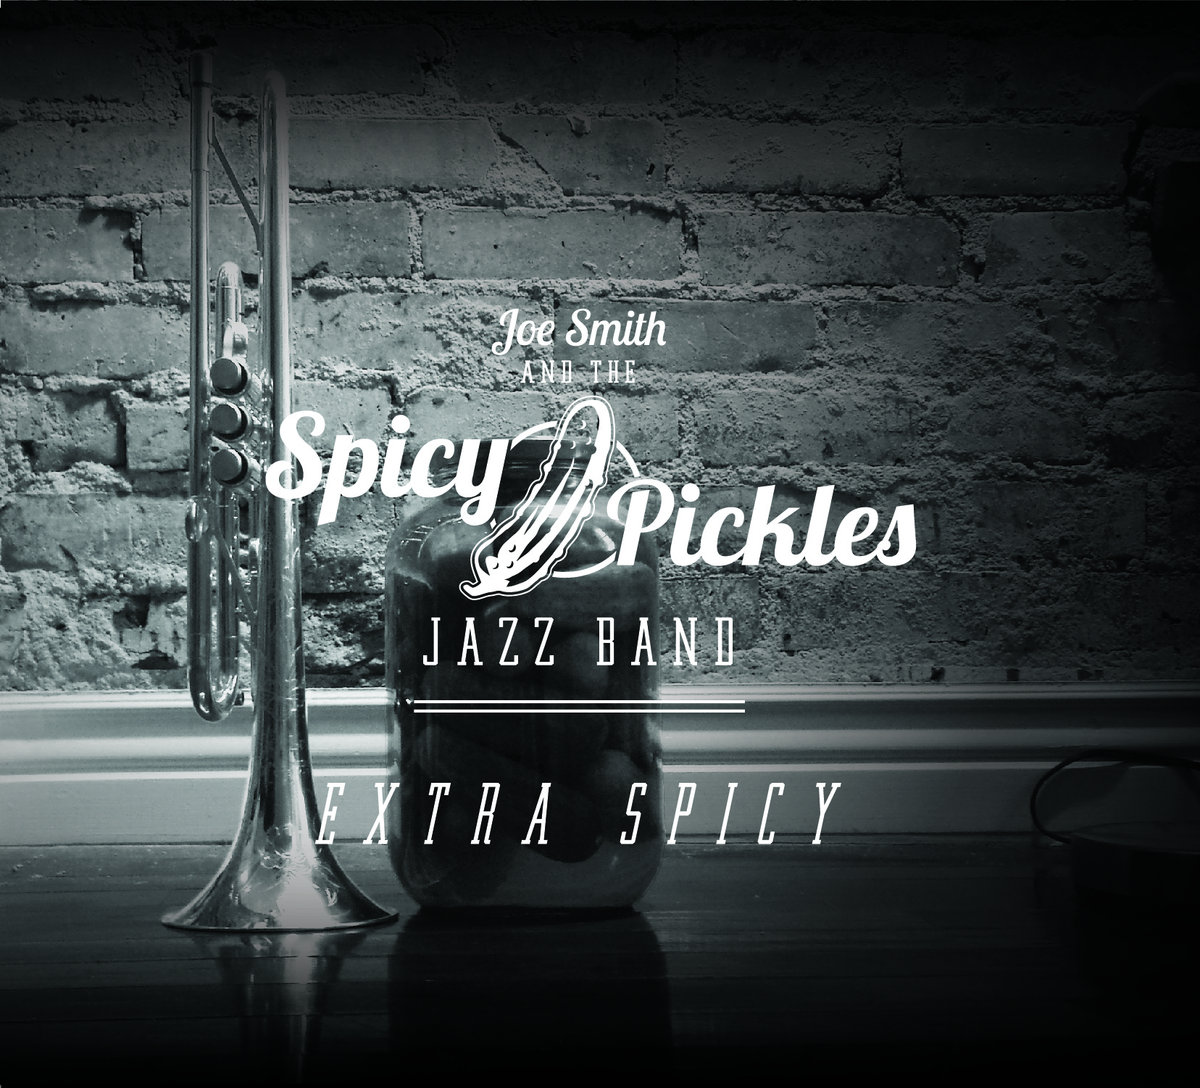 Joe Smith and the Spicy Pickles Jazz Band